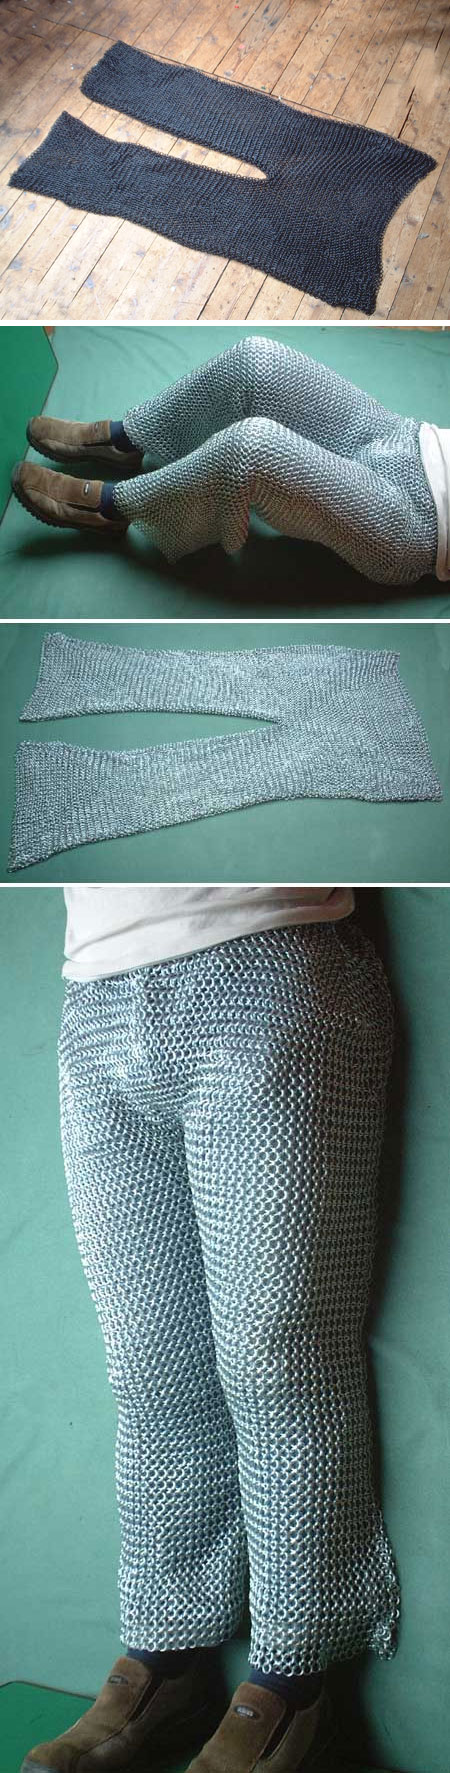 Chainmail trousers, blackened